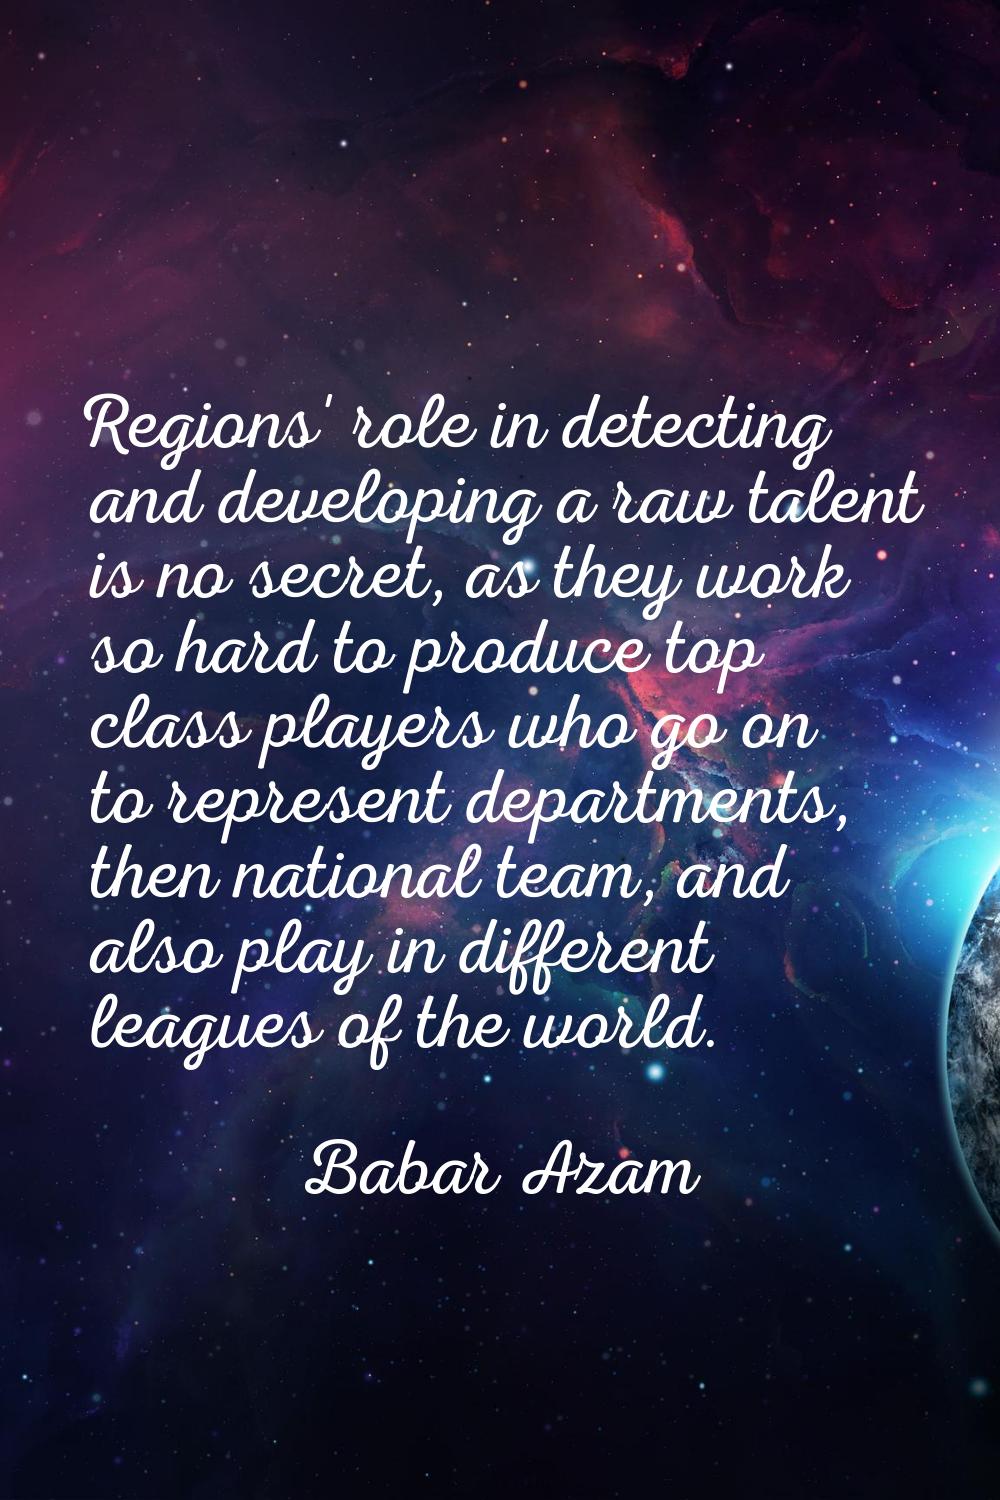 Regions' role in detecting and developing a raw talent is no secret, as they work so hard to produc